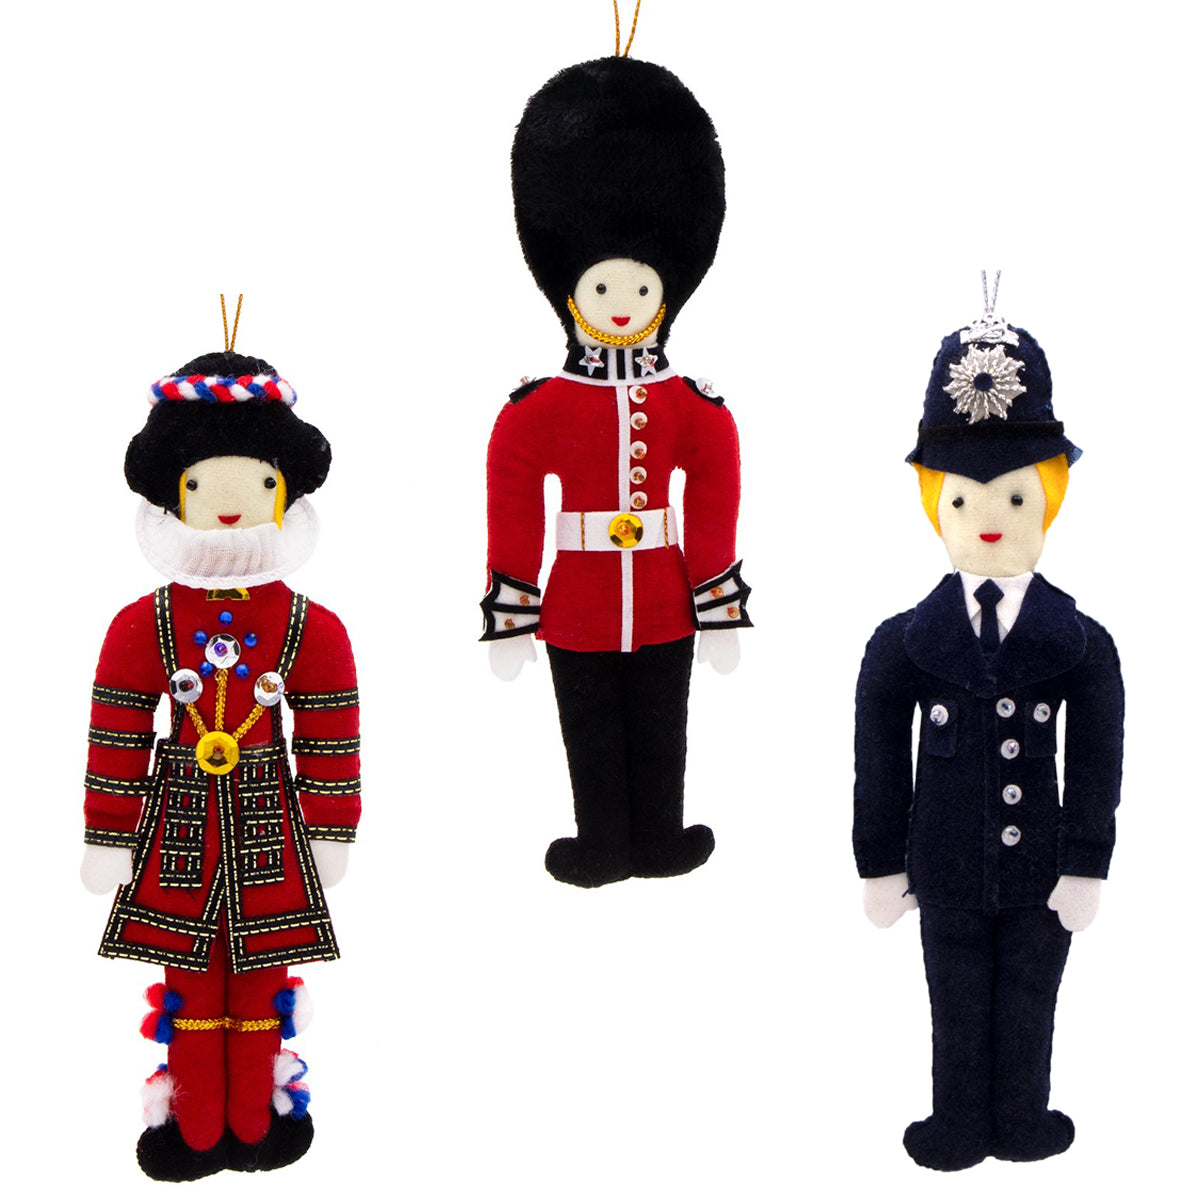 Stitched Christmas Decoration 3 Pack - Beefeater / Queen's Guard / Policemen